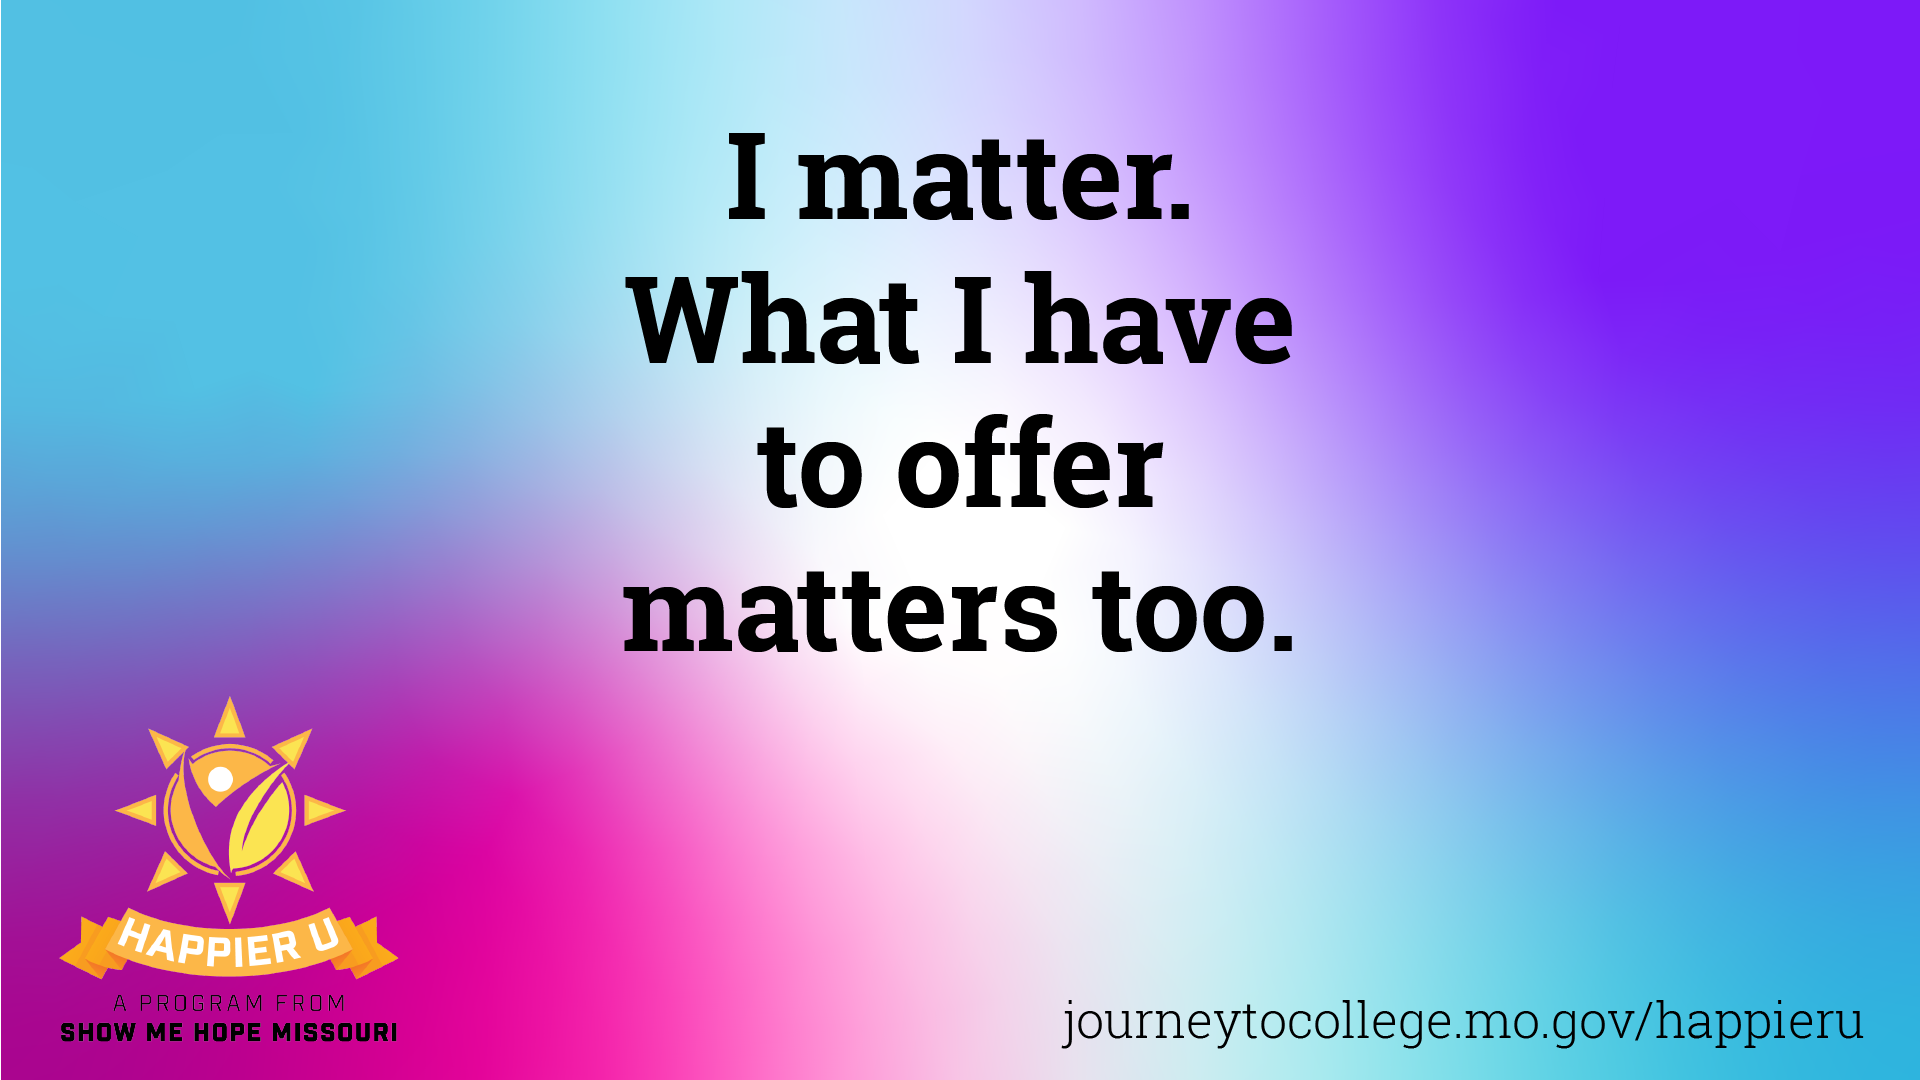 "I matter. What I have to offer matters too"